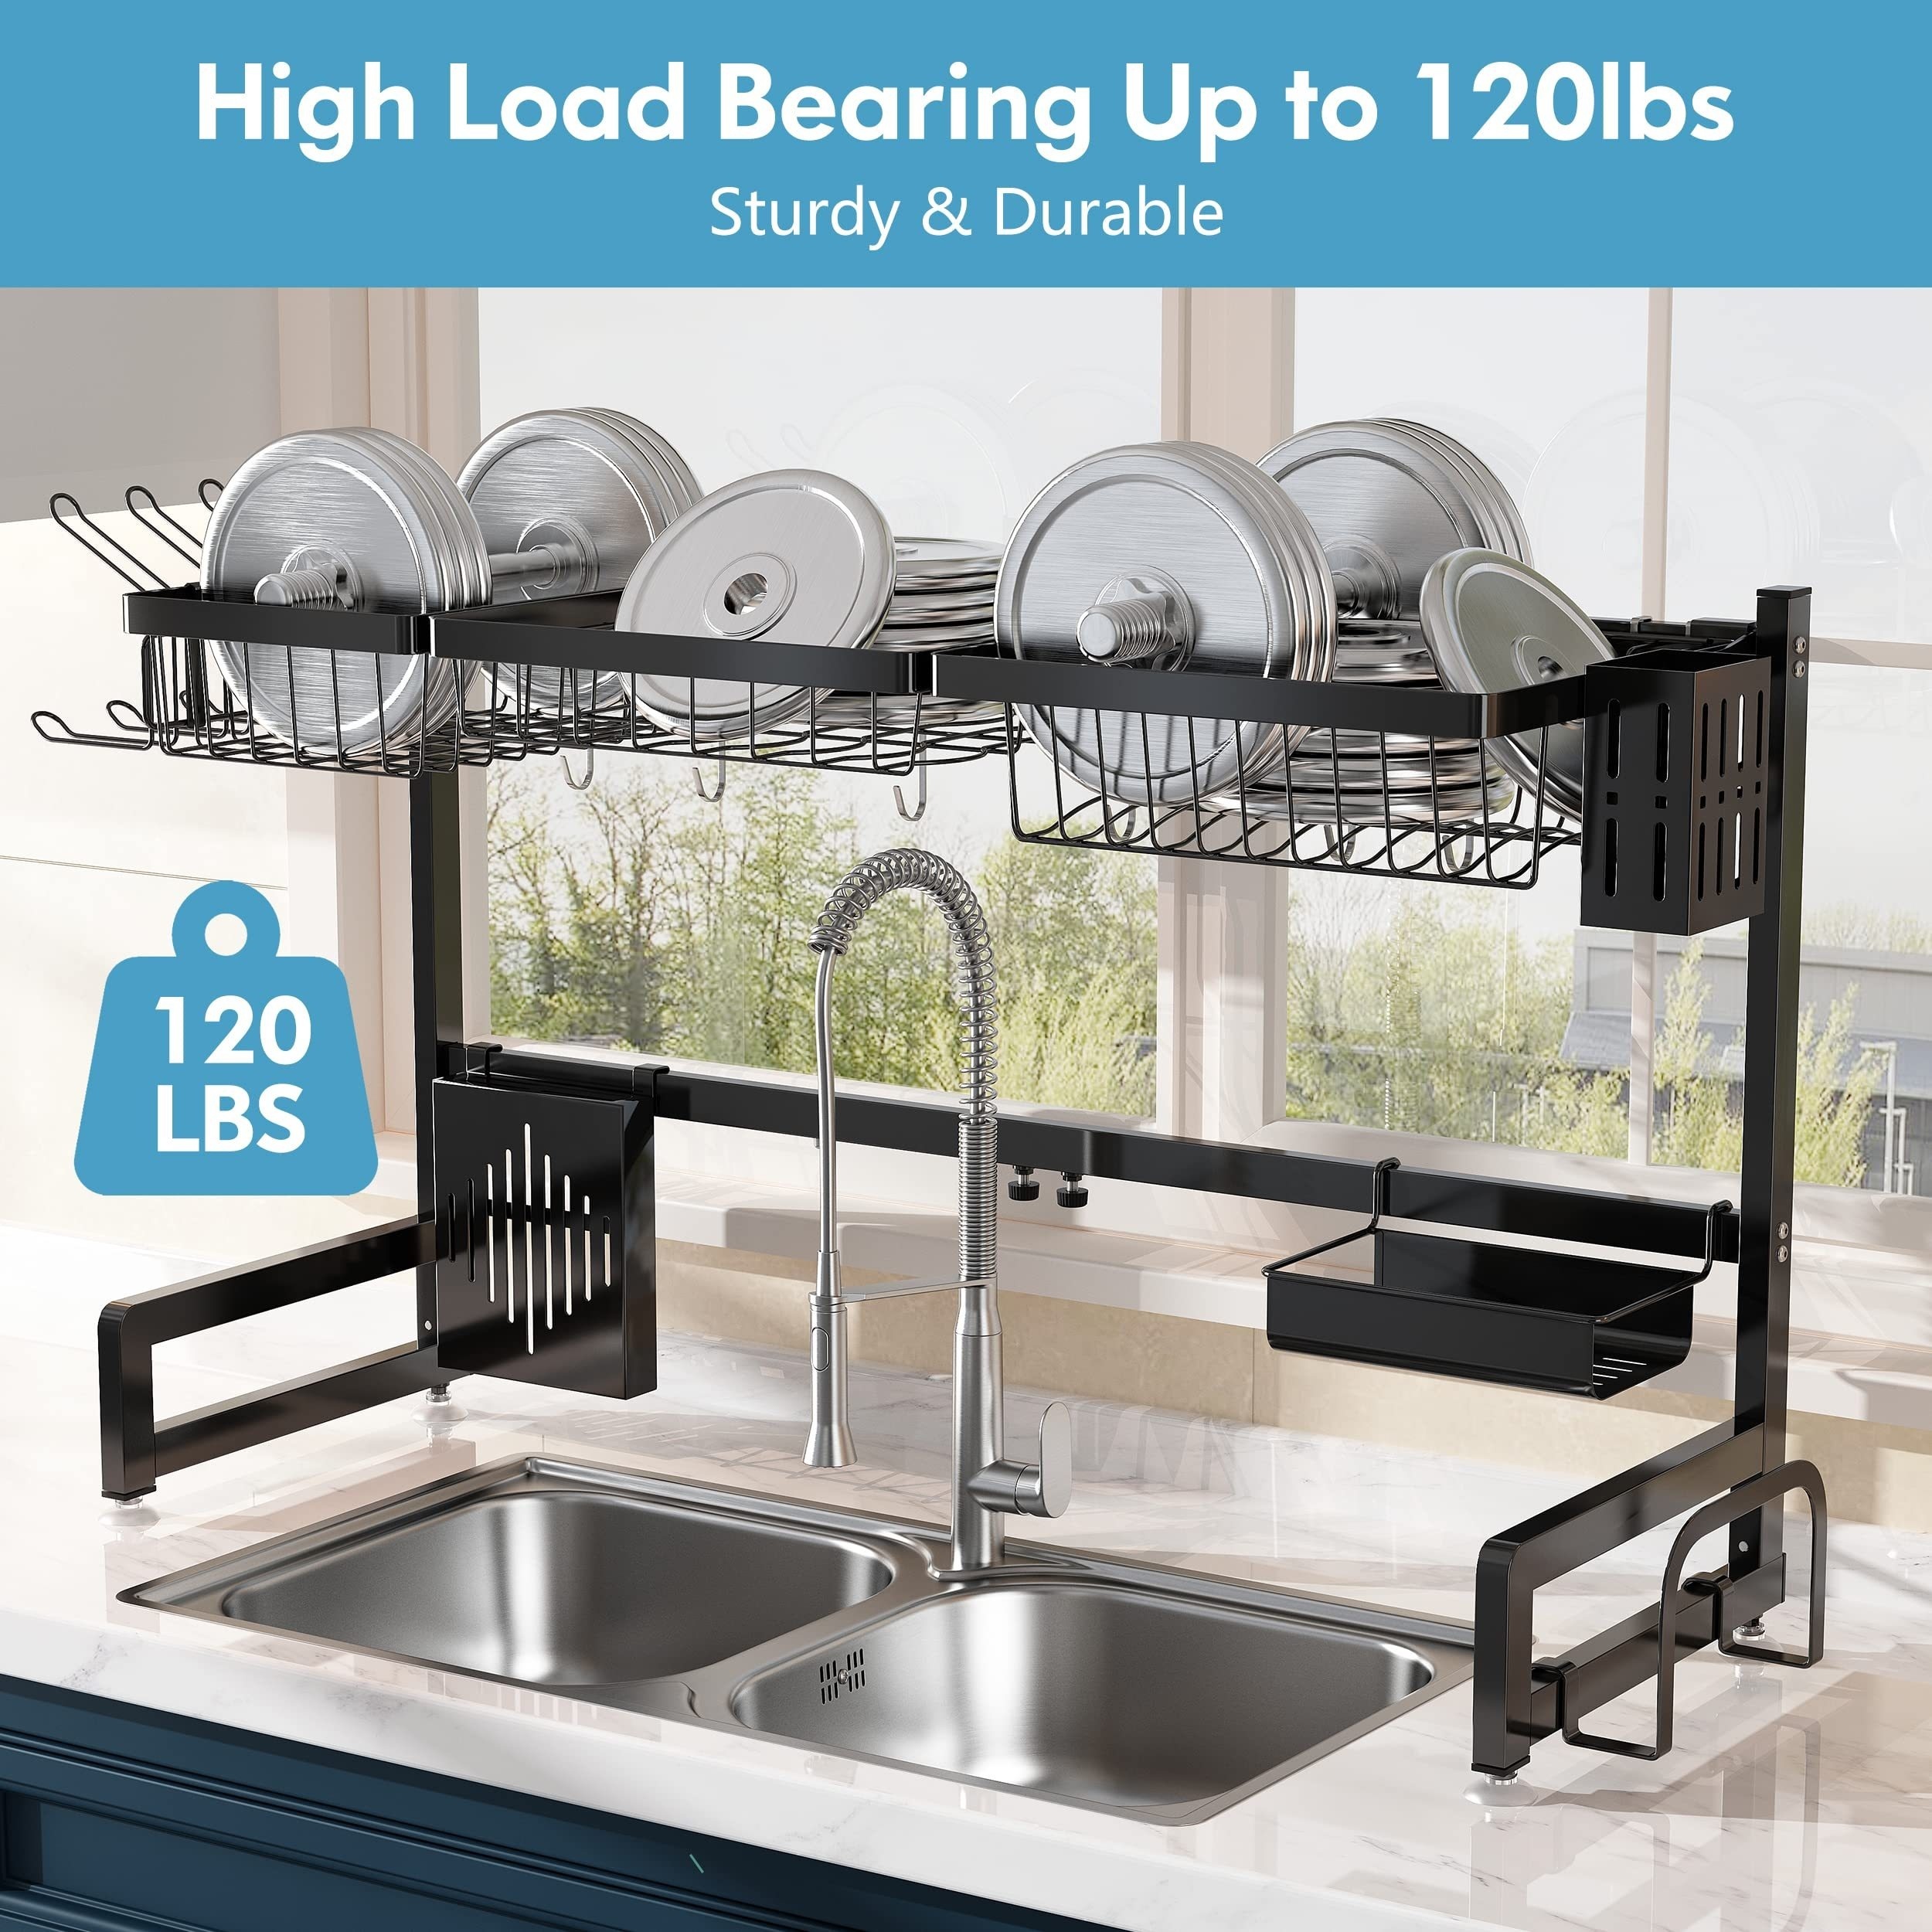 Over The Sink Dish Drying Rack,Adjustable,2 Tier Stainless Steel Dish Rack  Drainer, Large Stainless Steel Dish Rack Over Sink for Kitchen Counter  Organizer Storage Space Saver with Hooks 33.5 